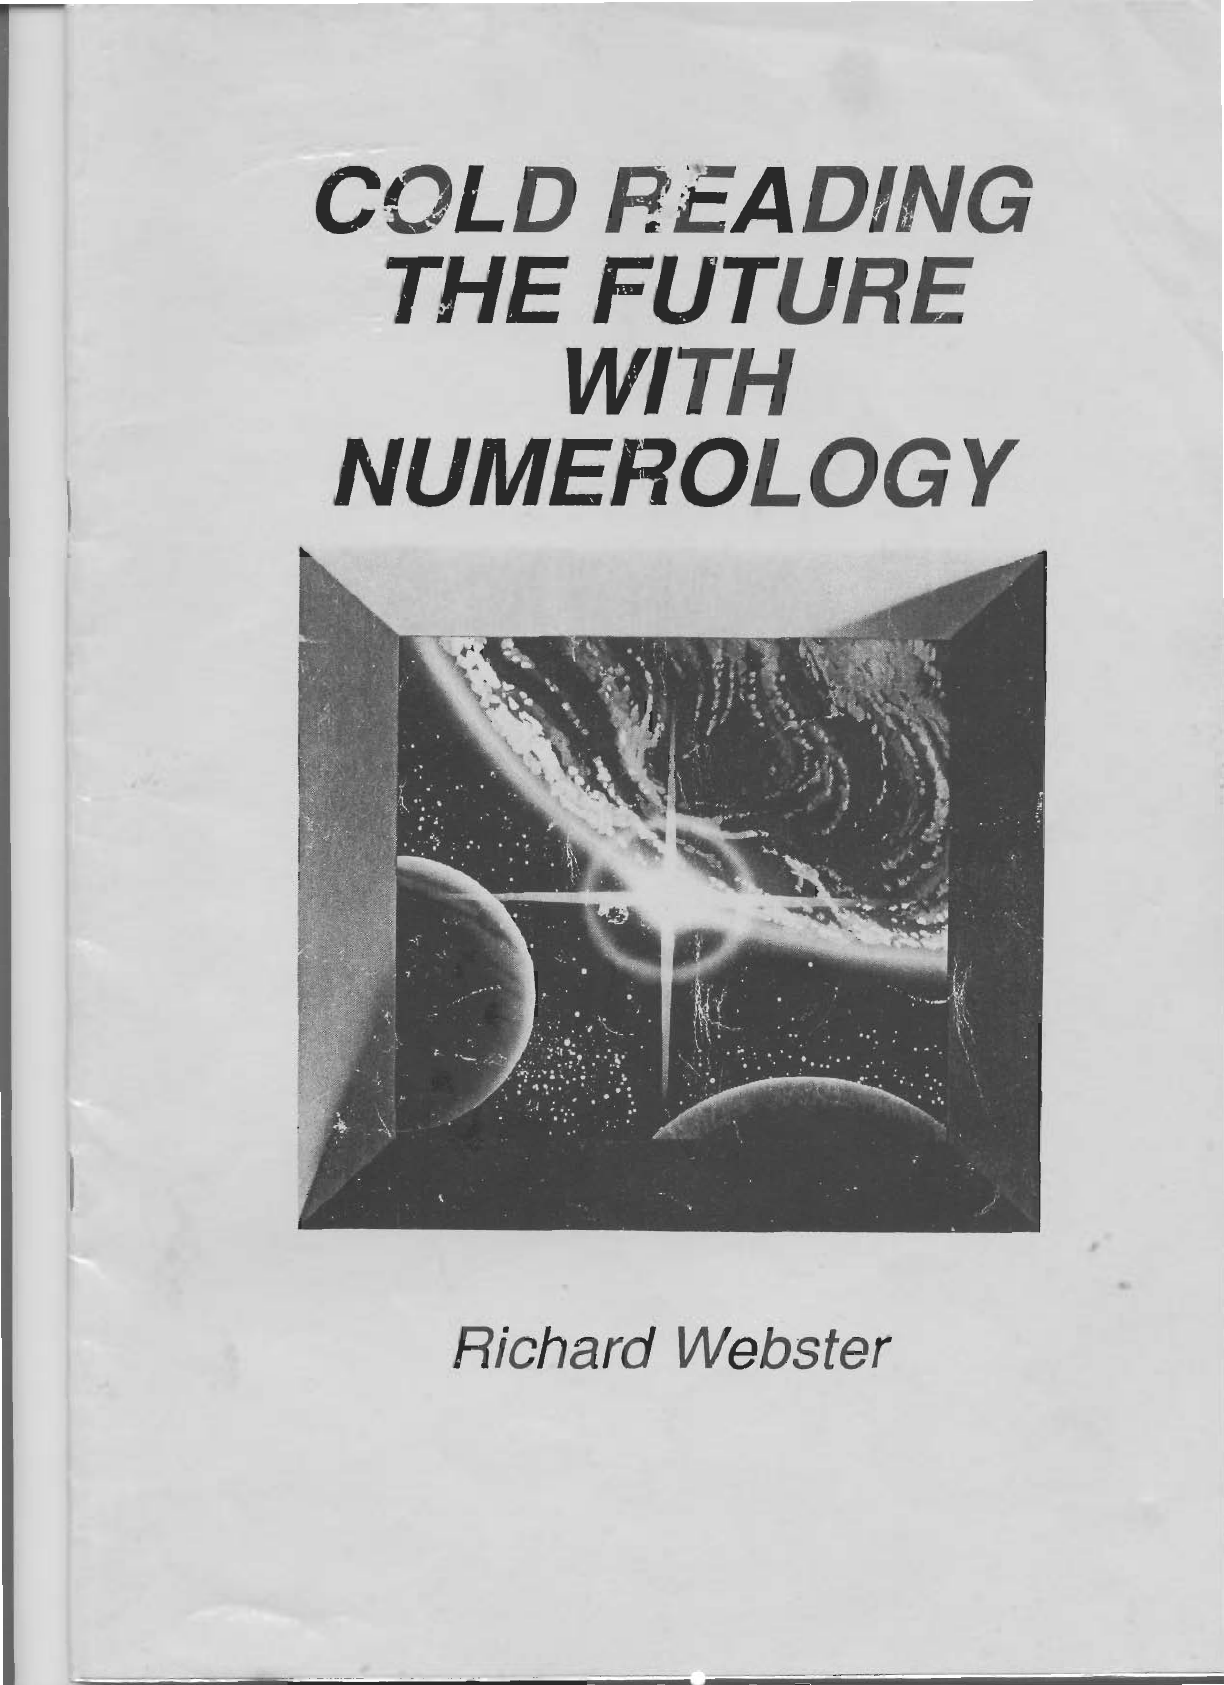 Richard Webster - Cold Reading The Future With Numerology